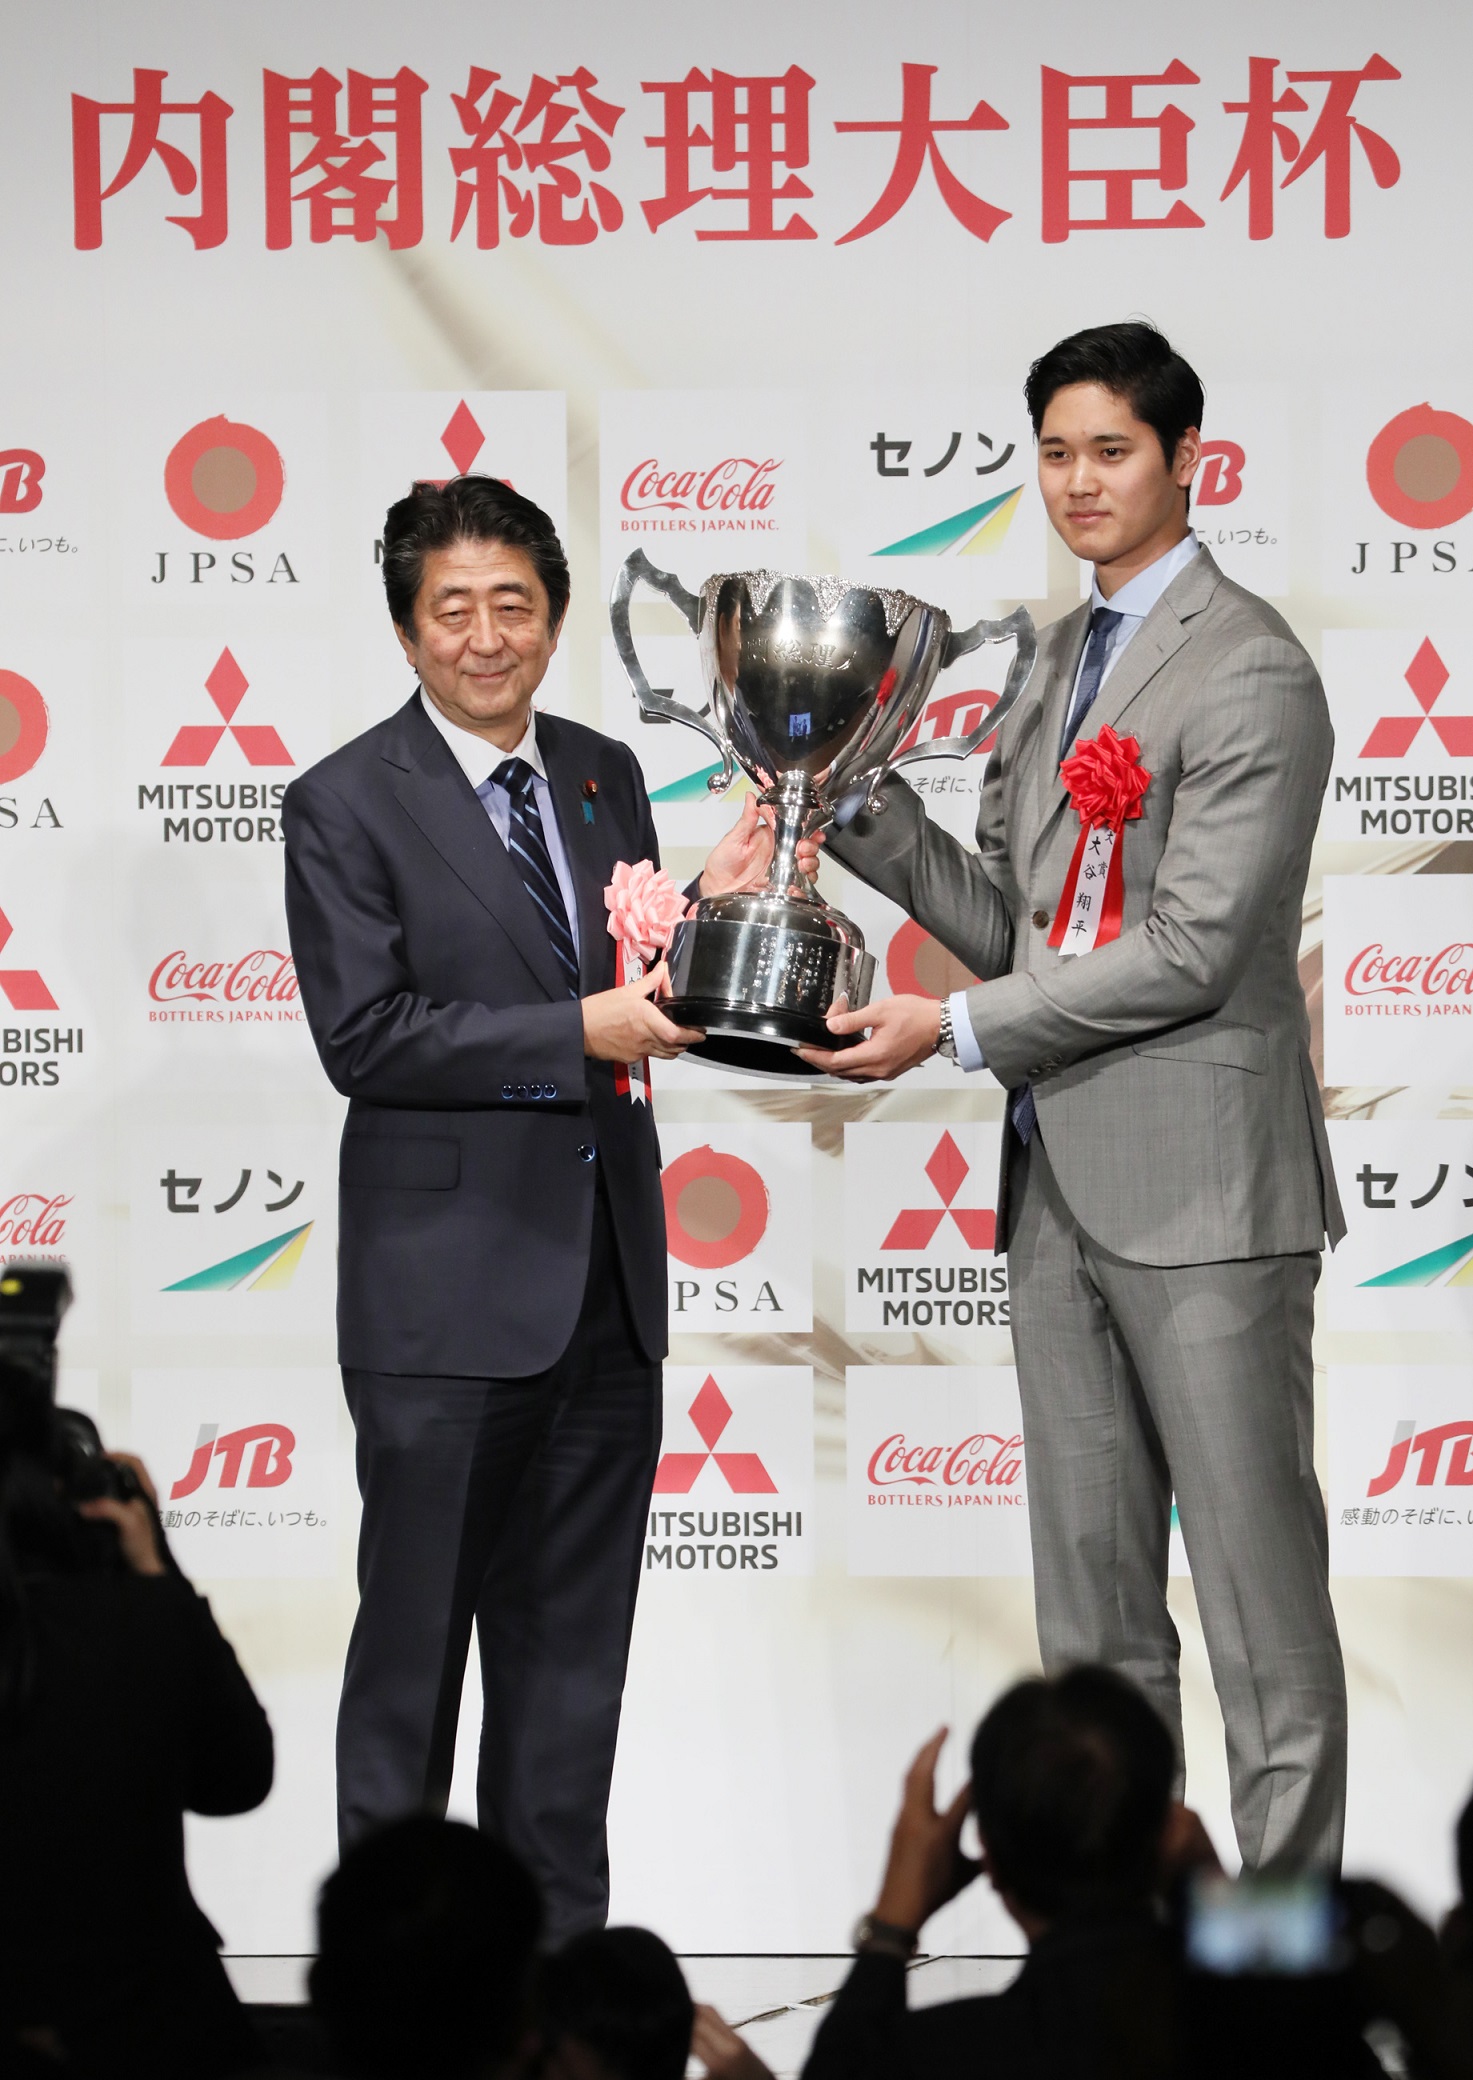 Shohei Ohtani receives Prime Minister Cup for second time at Japan Pro  Sports Awards - The Japan Times